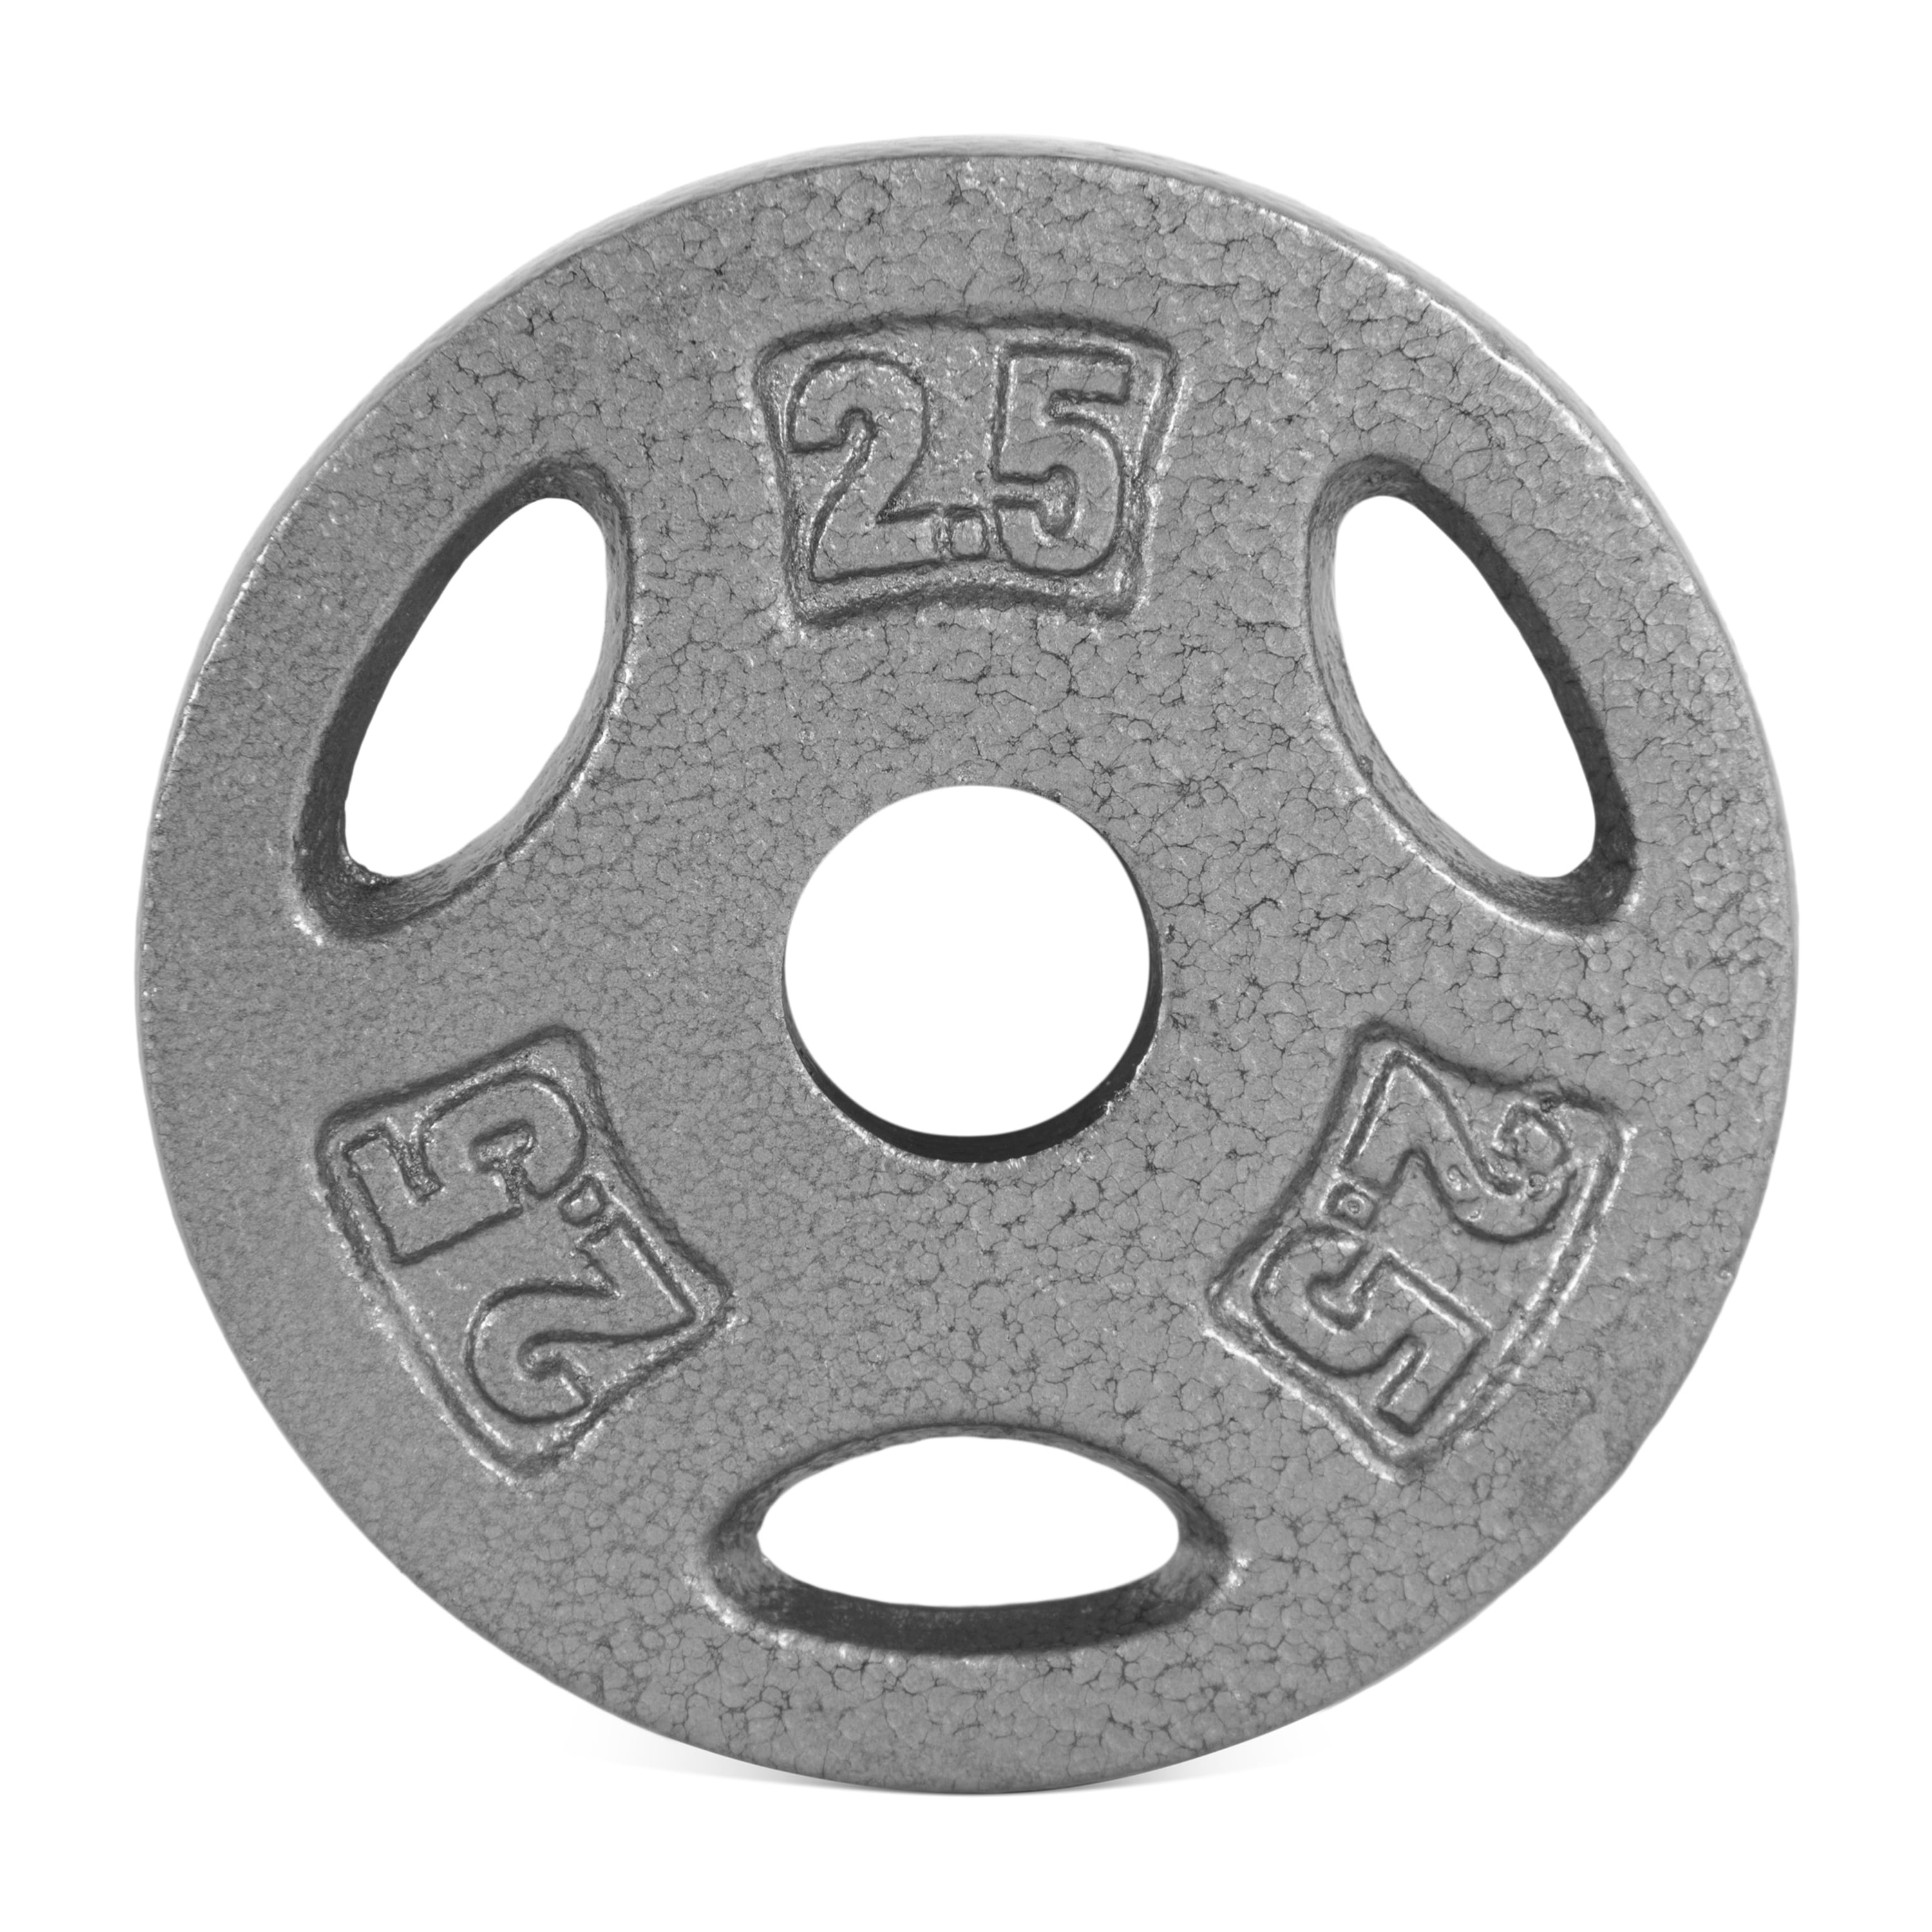 CAP 50lb Olympic Weight Plate Set 4x10 LB Plates 2x5lb Total 50 Pound 2” for sale online 